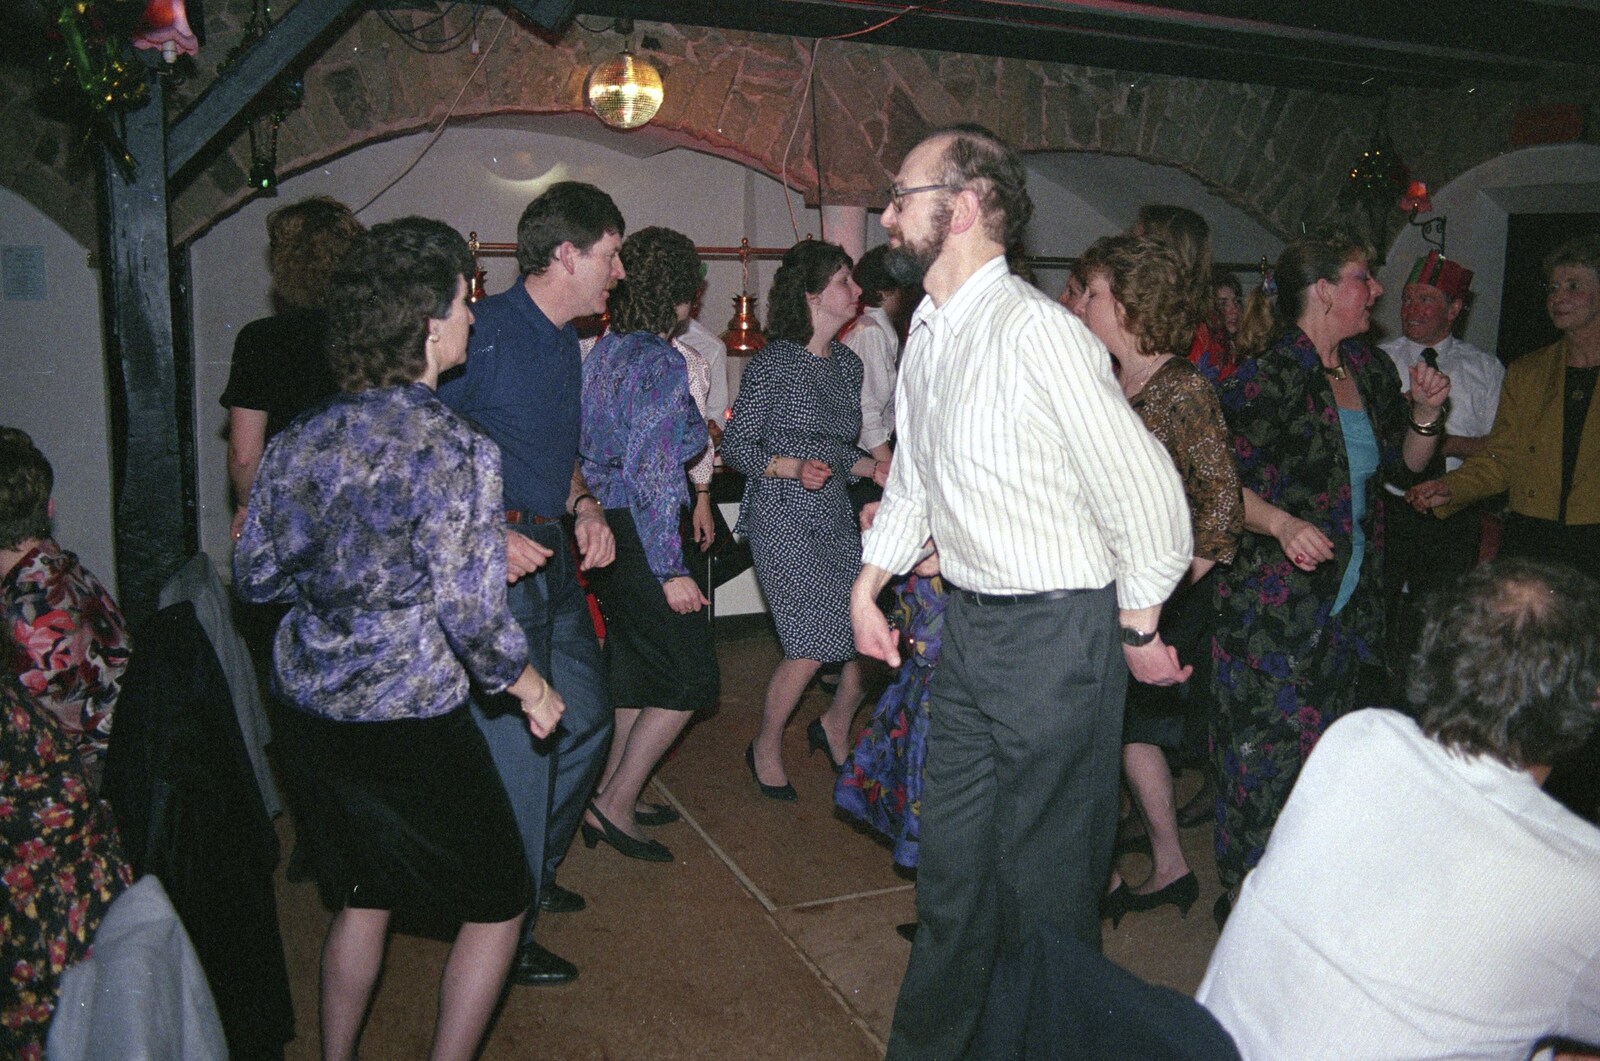 Spam and Baz doe some funky moves from Printec's Christmas Dinner, Harleston, Norfolk - 22nd December 1990